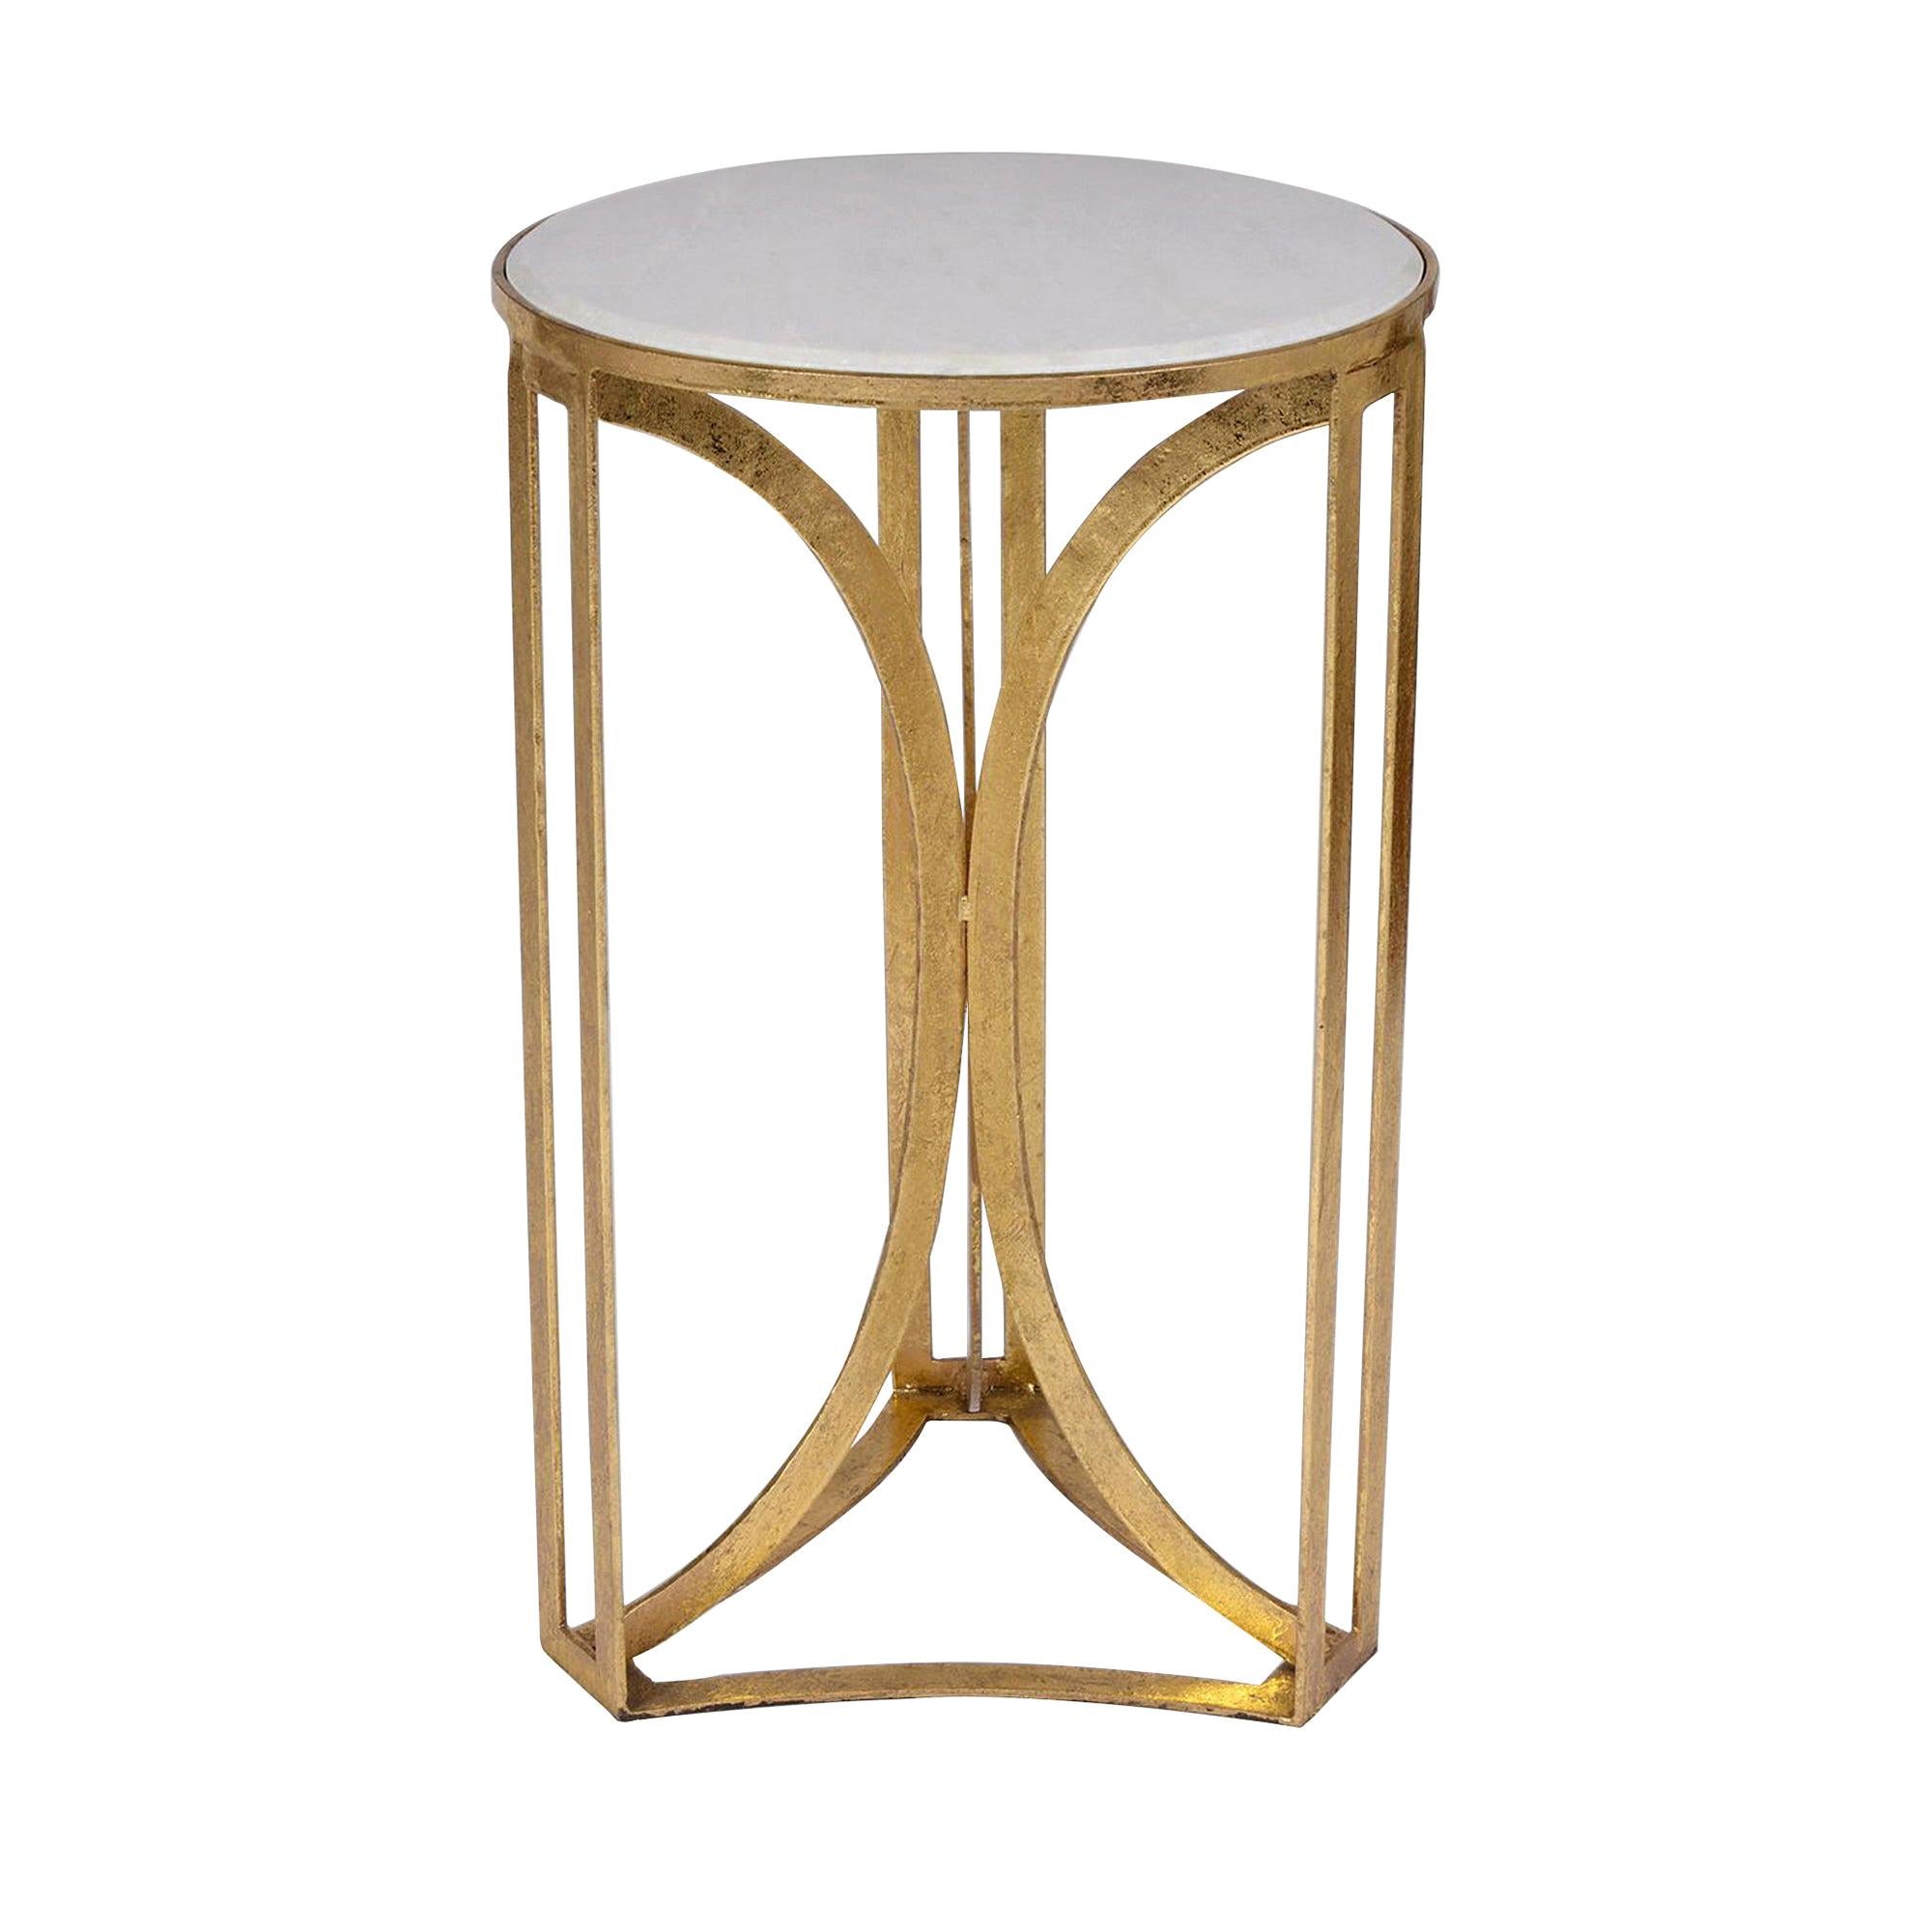 Jack Accent Table in Gold Leaf by CuratedKravet